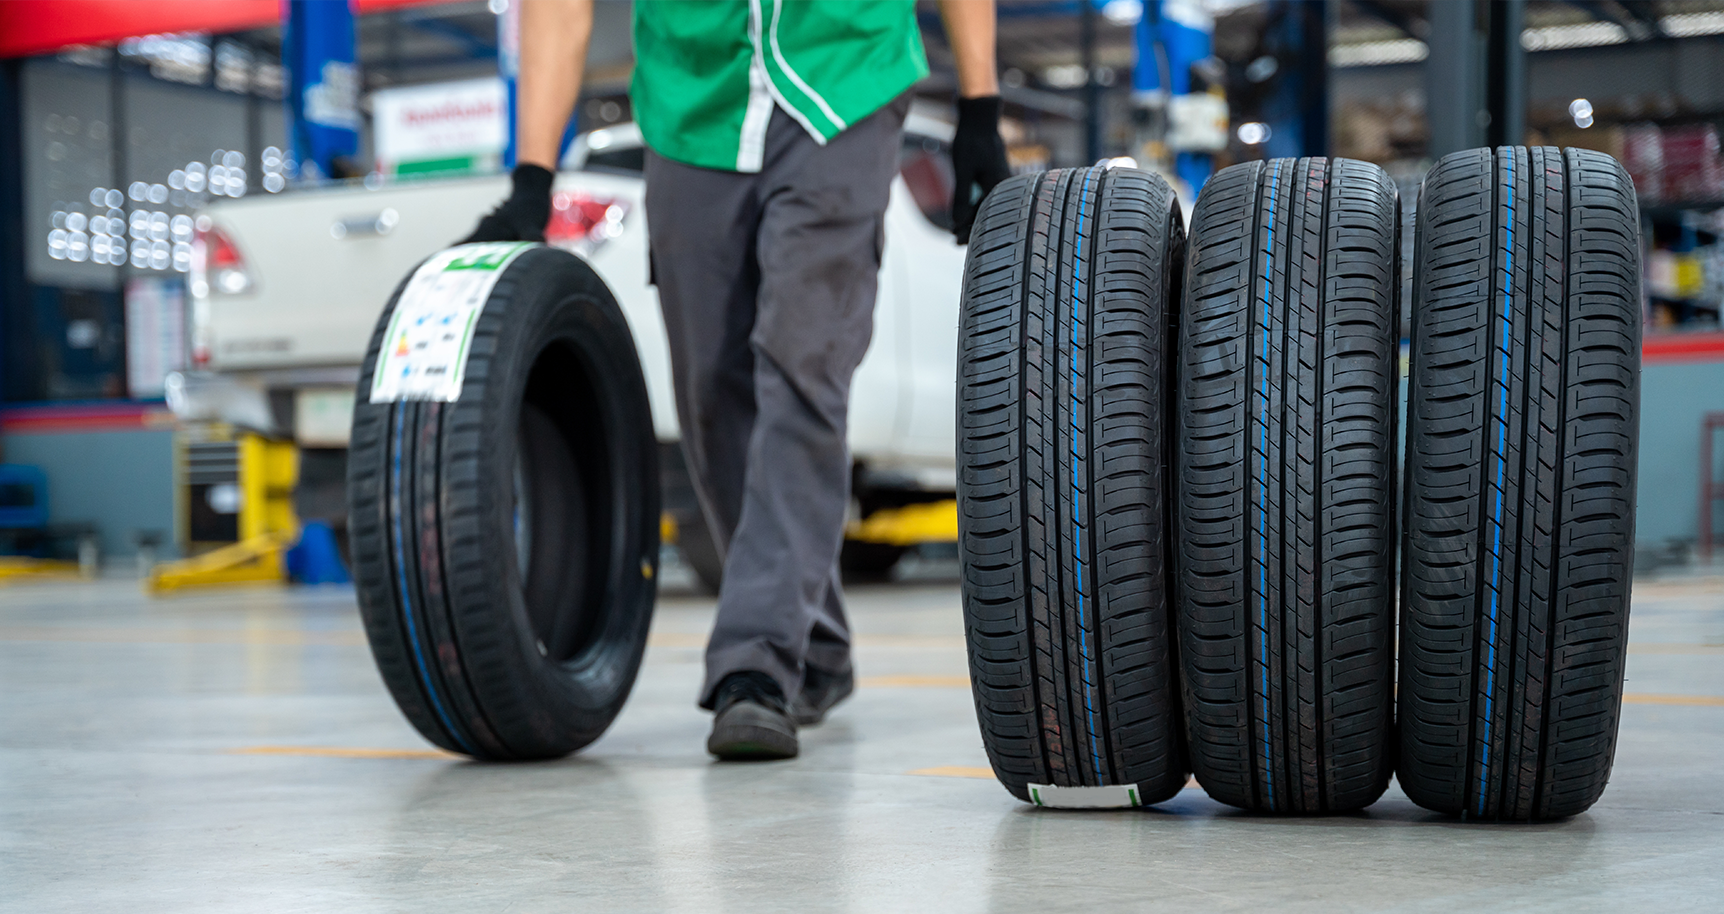 Tires are critical to the function and safety of your car